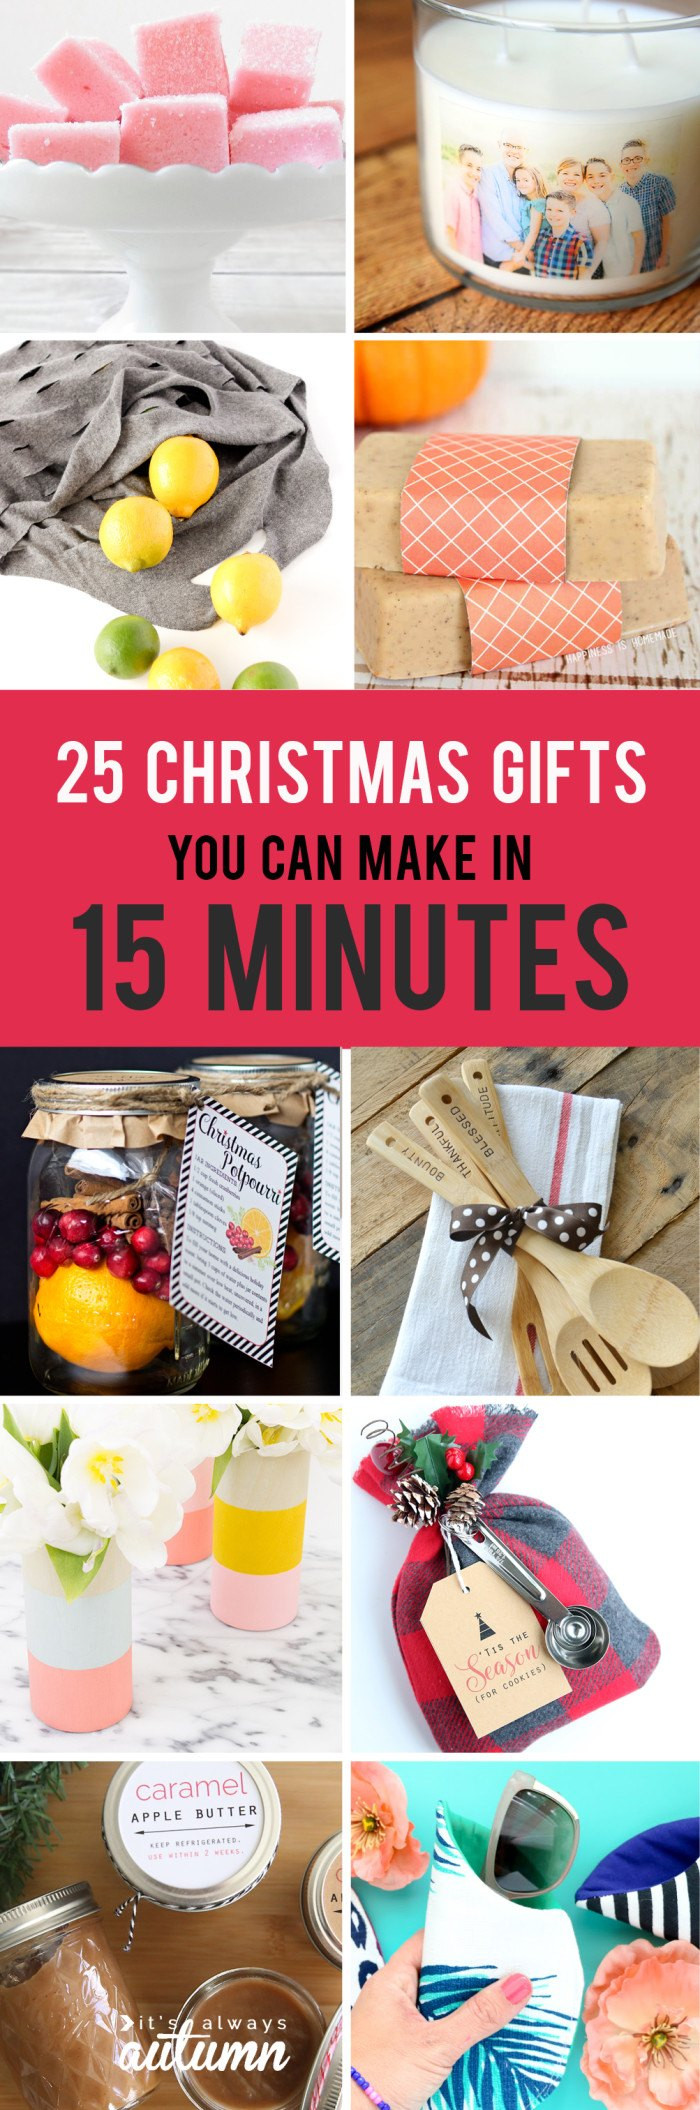 Easy DIY Christmas Gifts
 25 Easy Christmas Gifts That You Can Make in 15 Minutes